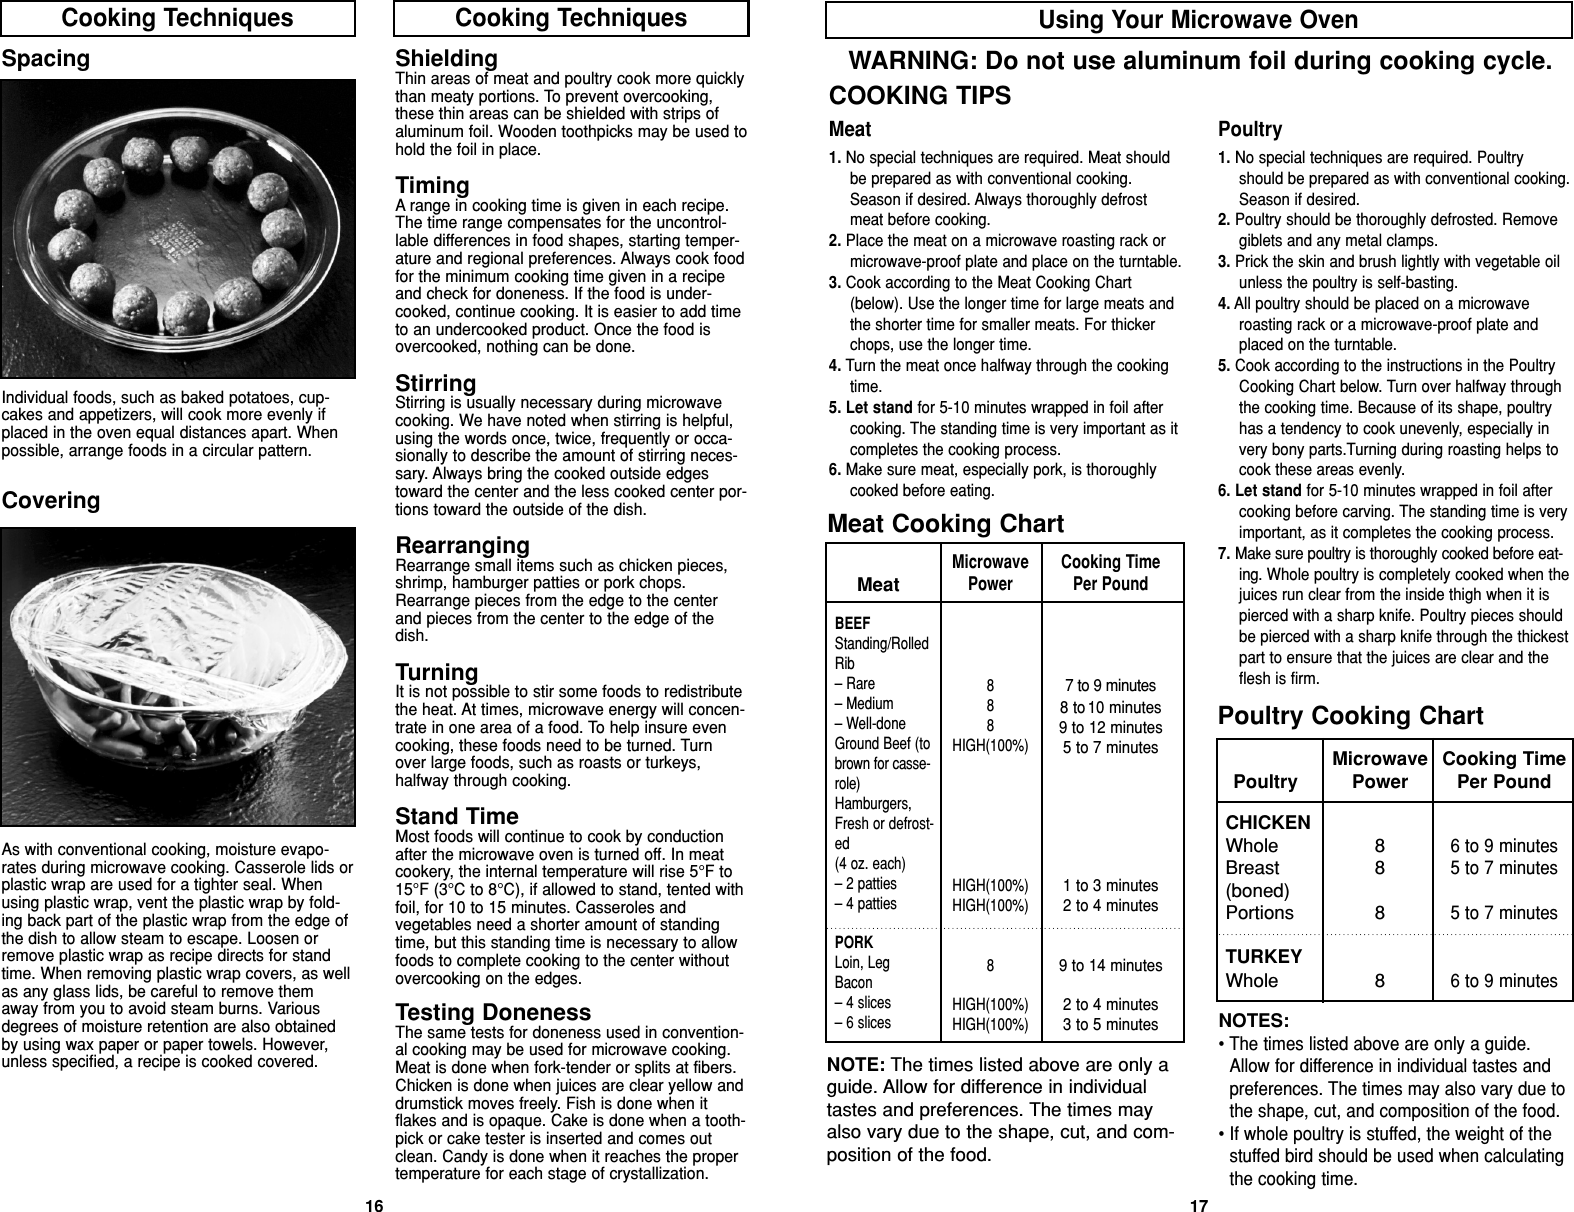 1716Meat1. No special techniques are required. Meat shouldbe prepared as with conventional cooking.Season if desired. Always thoroughly defrostmeat before cooking.2. Place the meat on a microwave roasting rack ormicrowave-proof plate and place on the turntable.3. Cook according to the Meat Cooking Chart(below). Use the longer time for large meats andthe shorter time for smaller meats. For thickerchops, use the longer time.4. Turn the meat once halfway through the cookingtime.5. Let stand for 5-10 minutes wrapped in foil aftercooking. The standing time is very important as itcompletes the cooking process.6. Make sure meat, especially pork, is thoroughlycooked before eating.Poultry1. No special techniques are required. Poultryshould be prepared as with conventional cooking.Season if desired.2. Poultry should be thoroughly defrosted. Removegiblets and any metal clamps.3. Prick the skin and brush lightly with vegetable oilunless the poultry is self-basting.4. All poultry should be placed on a microwaveroasting rack or a microwave-proof plate andplaced on the turntable.5. Cook according to the instructions in the PoultryCooking Chart below. Turn over halfway throughthe cooking time. Because of its shape, poultryhas a tendency to cook unevenly, especially invery bony parts.Turning during roasting helps tocook these areas evenly.6. Let stand for 5-10 minutes wrapped in foil aftercooking before carving. The standing time is veryimportant, as it completes the cooking process.7. Make sure poultry is thoroughly cooked before eat-ing. Whole poultry is completely cooked when thejuices run clear from the inside thigh when it ispierced with a sharp knife. Poultry pieces shouldbe pierced with a sharp knife through the thickestpart to ensure that the juices are clear and theflesh is firm.WARNING: Do not use aluminum foil during cooking cycle.BEEFStanding/RolledRib– Rare– Medium– Well-doneGround Beef (tobrown for casse-role)Hamburgers,Fresh or defrost-ed(4 oz. each)– 2 patties– 4 pattiesPORKLoin, LegBacon– 4 slices– 6 slicesMicrowavePower888HIGH(100%)HIGH(100%)HIGH(100%)8HIGH(100%)HIGH(100%)Cooking TimePer Pound7 to 9 minutes8 to 10 minutes9 to 12 minutes 5 to 7 minutes1 to 3 minutes2 to 4 minutes9 to 14 minutes2 to 4 minutes3 to 5 minutesMeat Cooking ChartCHICKENWholeBreast(boned)PortionsTURKEYWholeMicrowavePower8888Cooking TimePer Pound6 to 9 minutes5 to 7 minutes5 to 7 minutes6 to 9 minutesPoultry Cooking ChartNOTES:• The times listed above are only a guide.Allow for difference in individual tastes andpreferences. The times may also vary due tothe shape, cut, and composition of the food.• If whole poultry is stuffed, the weight of thestuffed bird should be used when calculatingthe cooking time.NOTE: The times listed above are only aguide. Allow for difference in individualtastes and preferences. The times mayalso vary due to the shape, cut, and com-position of the food.PoultryCOOKING TIPSMeatUsing Your Microwave OvenCooking Techniques Cooking TechniquesShieldingThin areas of meat and poultry cook more quicklythan meaty portions. To prevent overcooking,these thin areas can be shielded with strips ofaluminum foil. Wooden toothpicks may be used tohold the foil in place.TimingA range in cooking time is given in each recipe.The time range compensates for the uncontrol-lable differences in food shapes, starting temper-ature and regional preferences. Always cook foodfor the minimum cooking time given in a recipeand check for doneness. If the food is under-cooked, continue cooking. It is easier to add timeto an undercooked product. Once the food isovercooked, nothing can be done.StirringStirring is usually necessary during microwavecooking. We have noted when stirring is helpful,using the words once, twice, frequently or occa-sionally to describe the amount of stirring neces-sary. Always bring the cooked outside edgestoward the center and the less cooked center por-tions toward the outside of the dish.RearrangingRearrange small items such as chicken pieces,shrimp, hamburger patties or pork chops.Rearrange pieces from the edge to the centerand pieces from the center to the edge of thedish.TurningIt is not possible to stir some foods to redistributethe heat. At times, microwave energy will concen-trate in one area of a food. To help insure evencooking, these foods need to be turned. Turnover large foods, such as roasts or turkeys,halfway through cooking.Stand TimeMost foods will continue to cook by conductionafter the microwave oven is turned off. In meatcookery, the internal temperature will rise 5°F to15°F (3°C to 8°C), if allowed to stand, tented withfoil, for 10 to 15 minutes. Casseroles andvegetables need a shorter amount of standingtime, but this standing time is necessary to allowfoods to complete cooking to the center withoutovercooking on the edges.Testing DonenessThe same tests for doneness used in convention-al cooking may be used for microwave cooking.Meat is done when fork-tender or splits at fibers.Chicken is done when juices are clear yellow anddrumstick moves freely. Fish is done when itflakes and is opaque. Cake is done when a tooth-pick or cake tester is inserted and comes outclean. Candy is done when it reaches the propertemperature for each stage of crystallization.SpacingIndividual foods, such as baked potatoes, cup-cakes and appetizers, will cook more evenly ifplaced in the oven equal distances apart. Whenpossible, arrange foods in a circular pattern.CoveringAs with conventional cooking, moisture evapo-rates during microwave cooking. Casserole lids orplastic wrap are used for a tighter seal. Whenusing plastic wrap, vent the plastic wrap by fold-ing back part of the plastic wrap from the edge ofthe dish to allow steam to escape. Loosen orremove plastic wrap as recipe directs for standtime. When removing plastic wrap covers, as wellas any glass lids, be careful to remove themaway from you to avoid steam burns. Variousdegrees of moisture retention are also obtainedby using wax paper or paper towels. However,unless specified, a recipe is cooked covered.